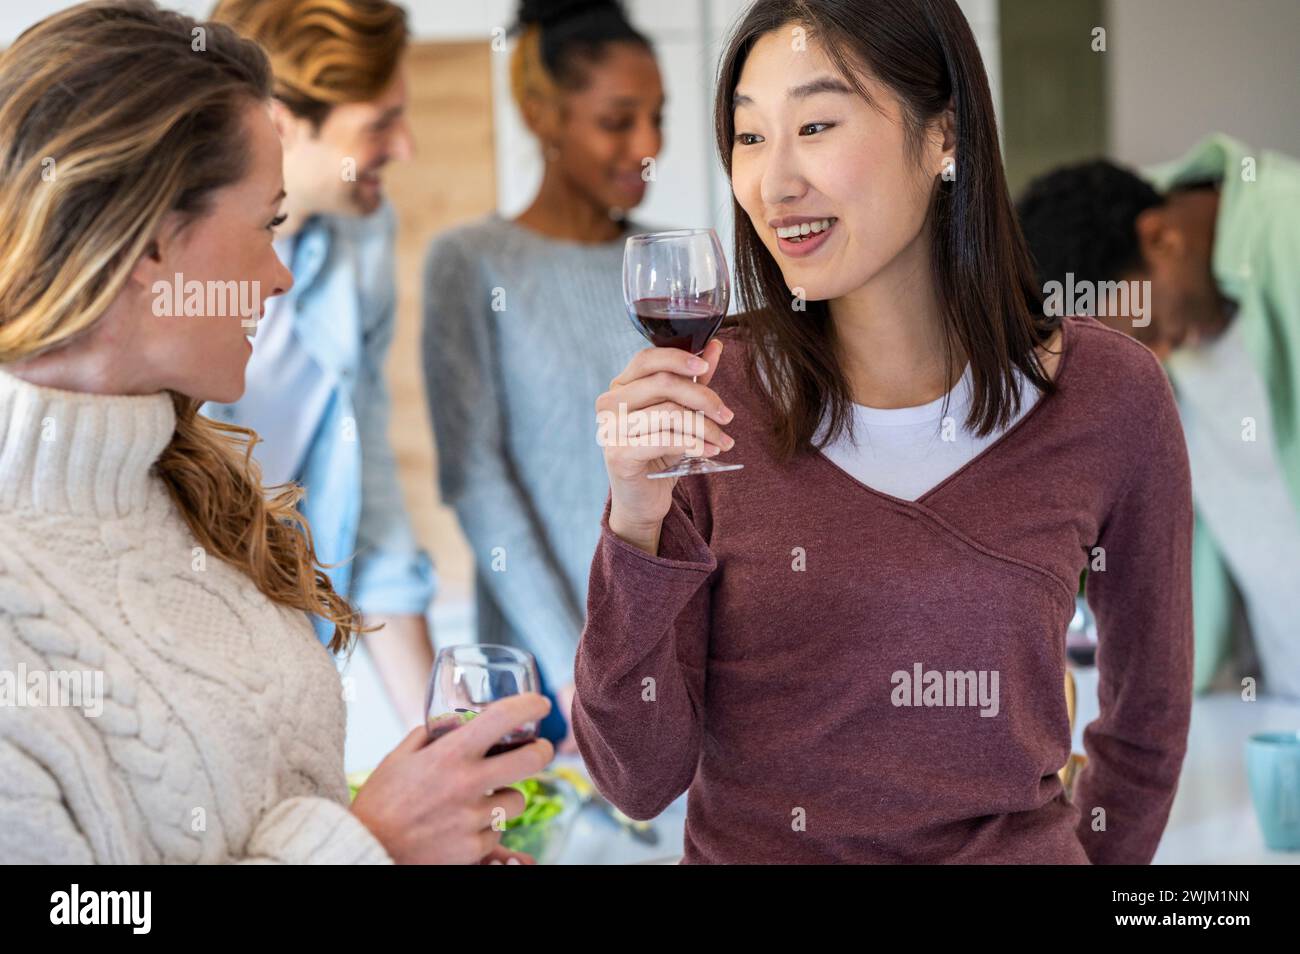 Two friends talking during reunion while drinking wine Stock Photo